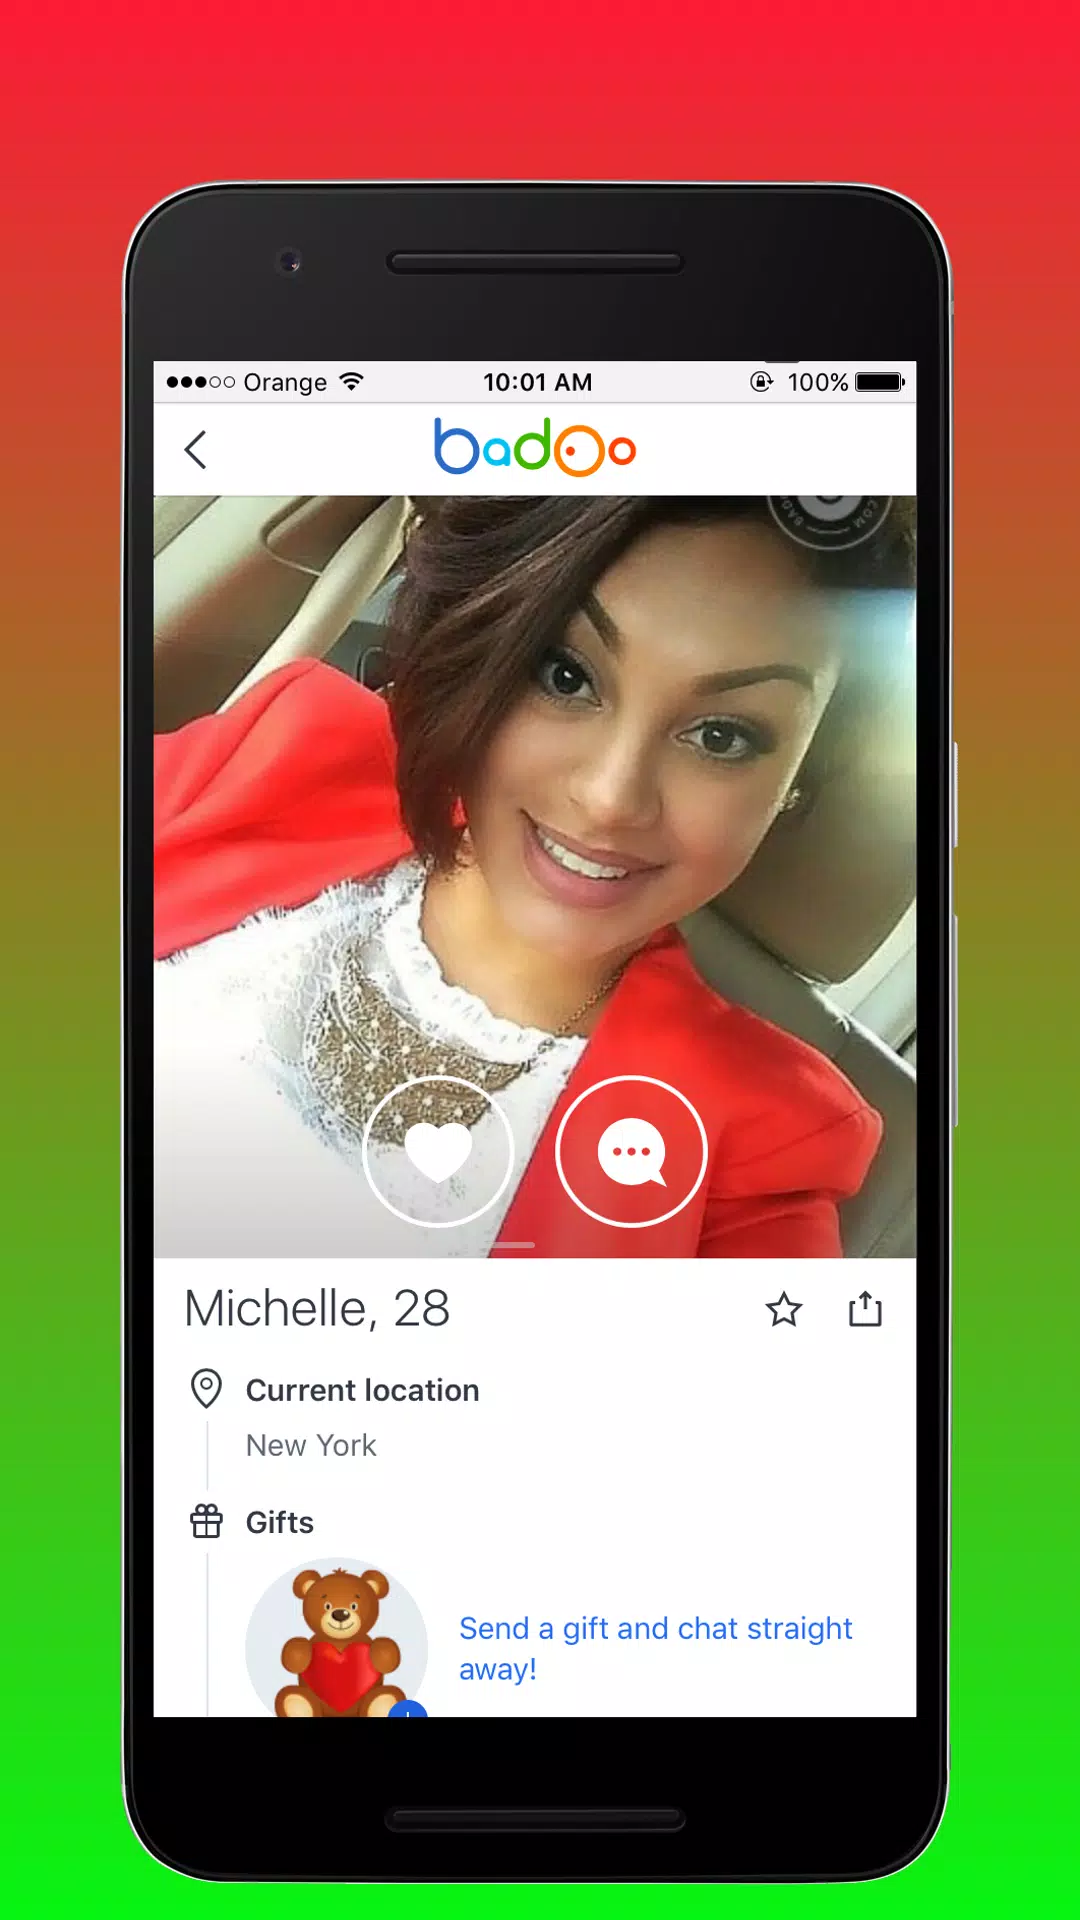 Badoo is it possible to chat without sending gifts